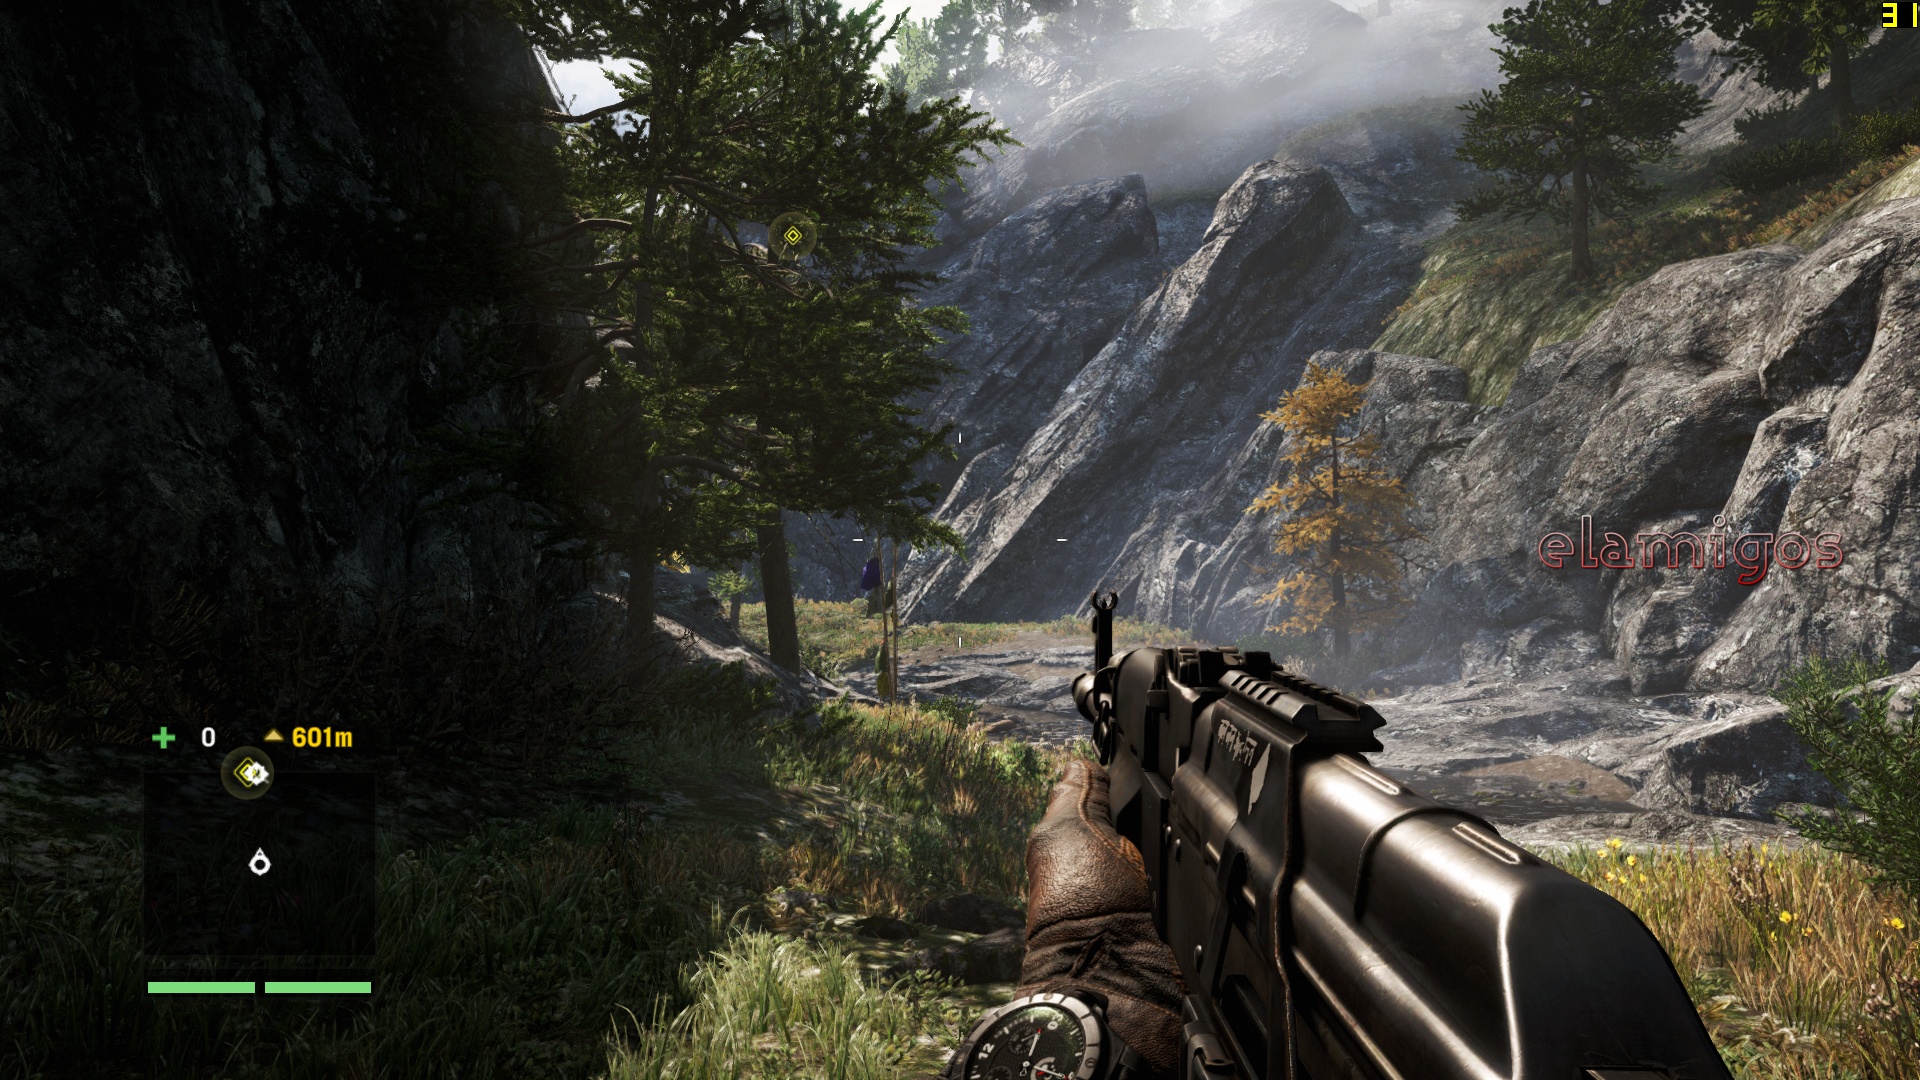 far cry 4 update 1.9 crack only ali213